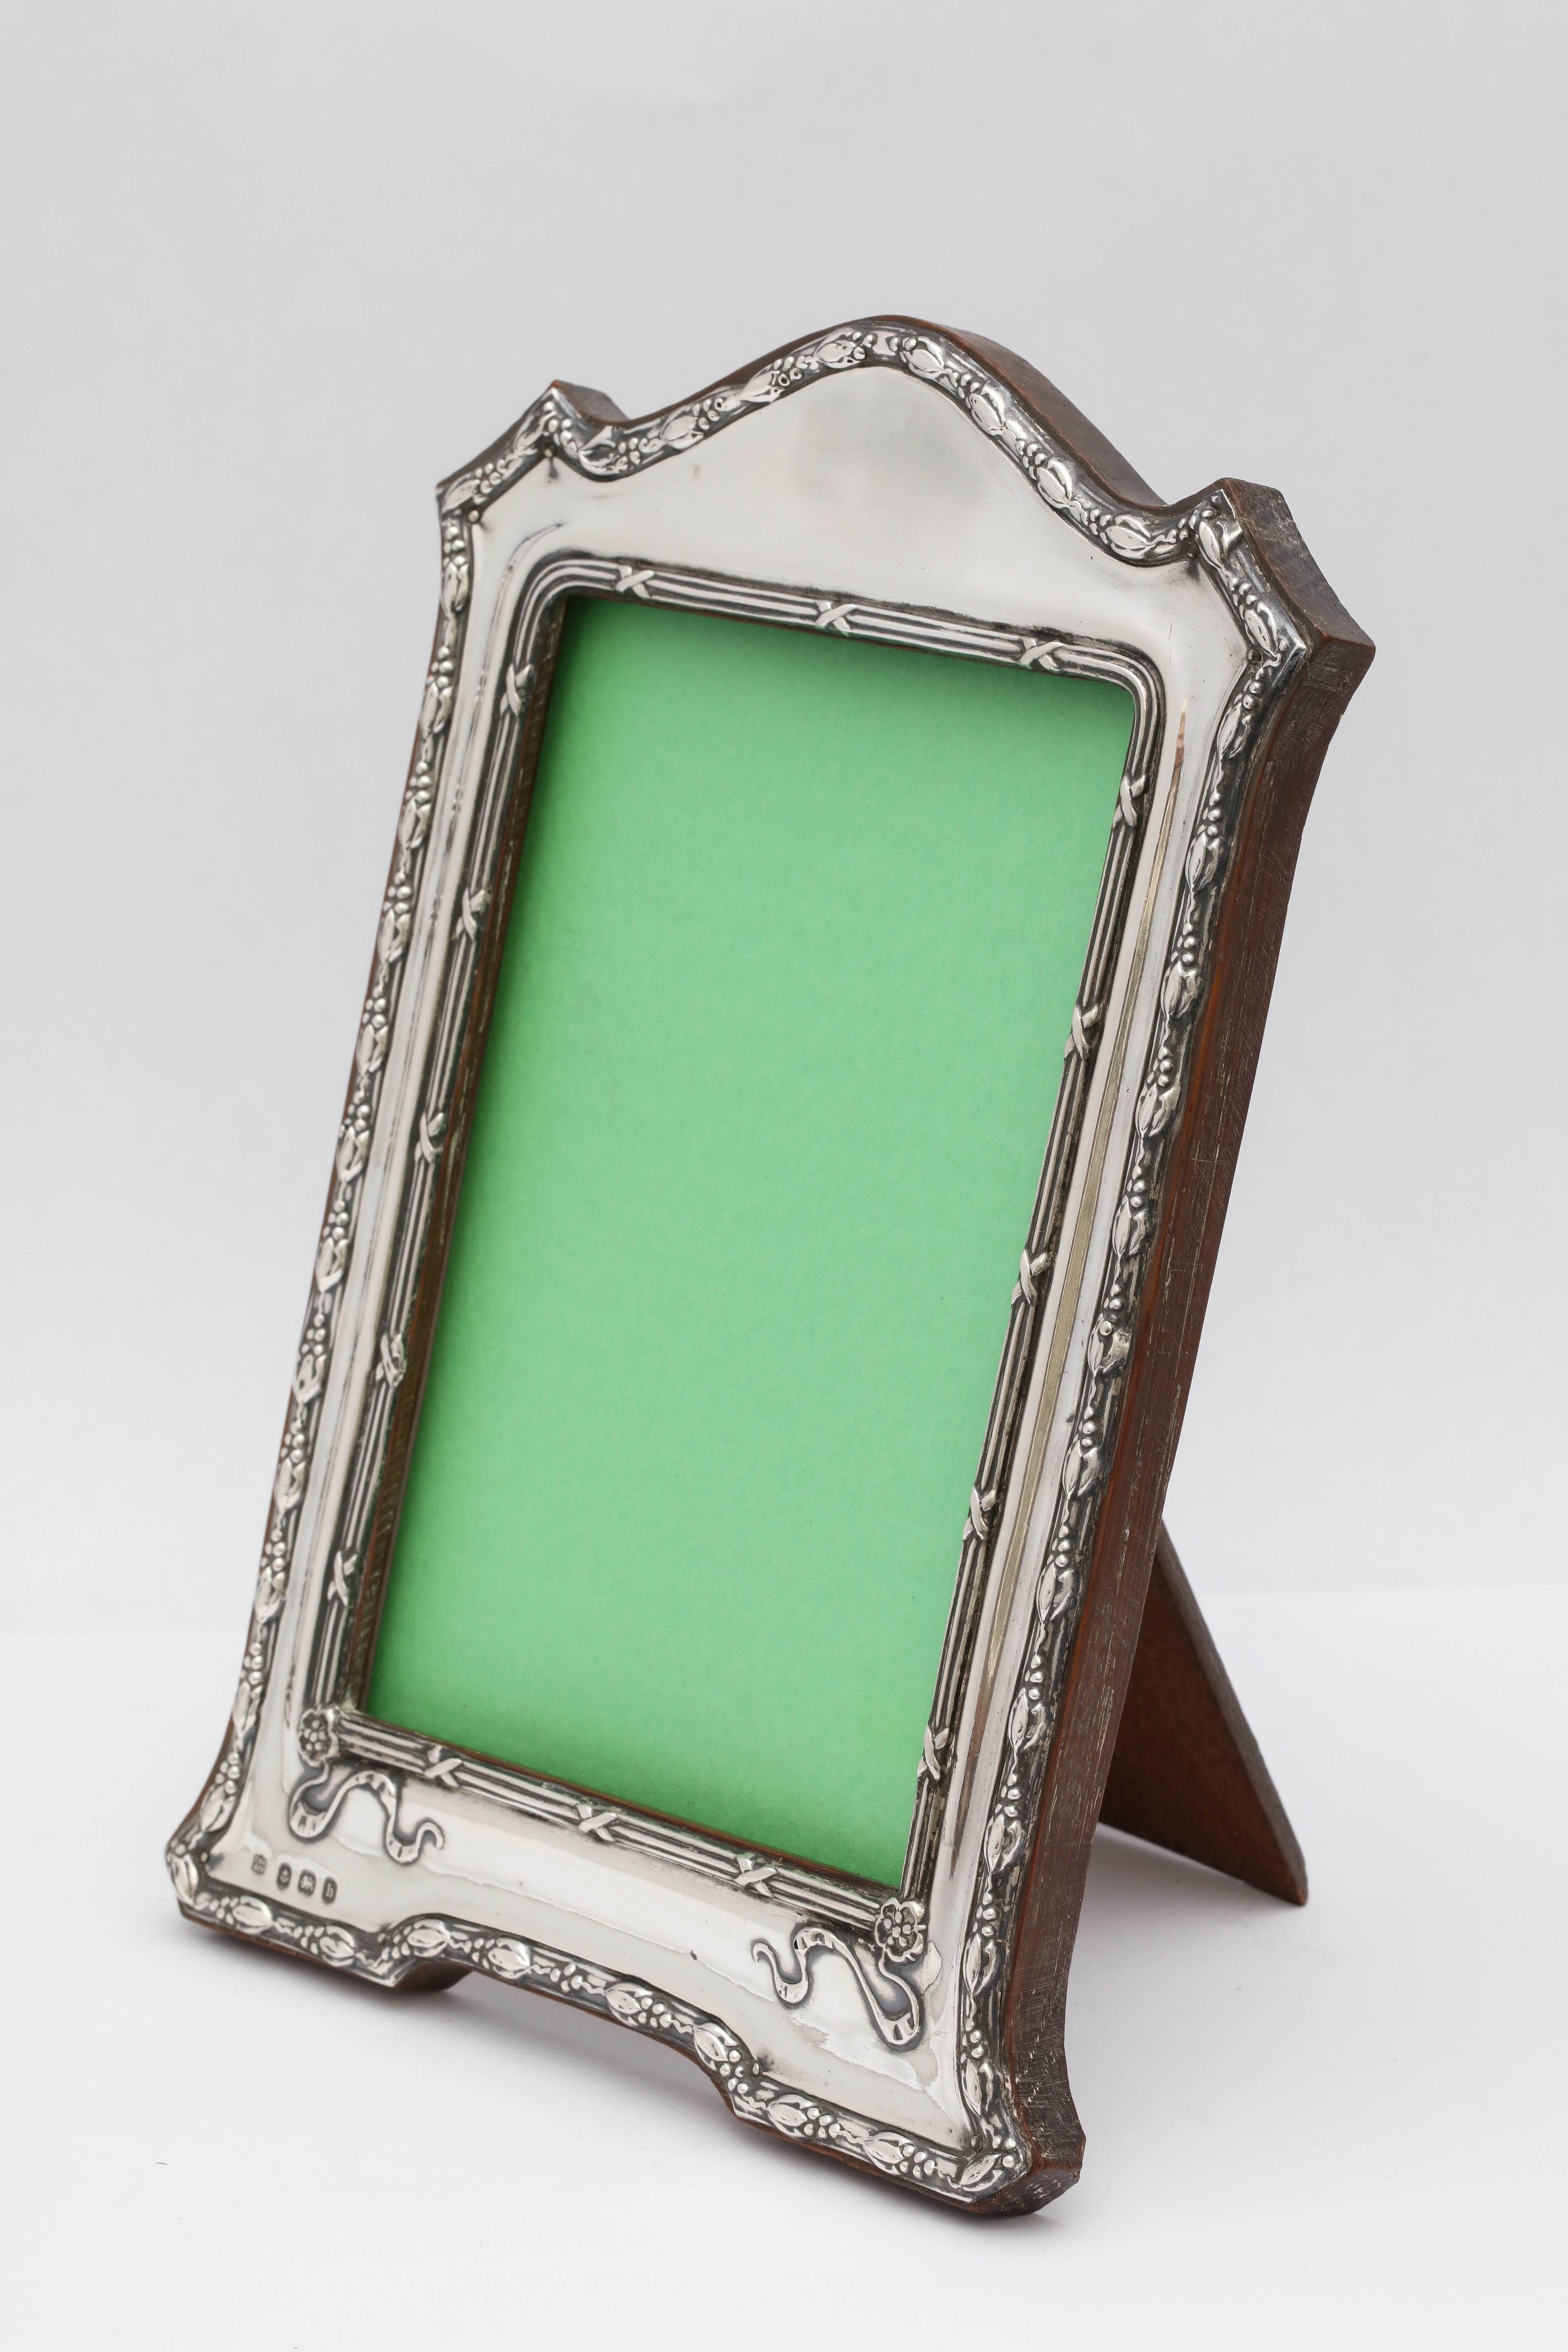 Edwardian, sterling silver, footed, hump top picture frame, Birmingham, England, 1907. Charles S. Green and Co. - makers. Measures: 8 1/2 inches high at highest point x 5 1/2 inches wide at widest point x 4 inches deep when easel is in open